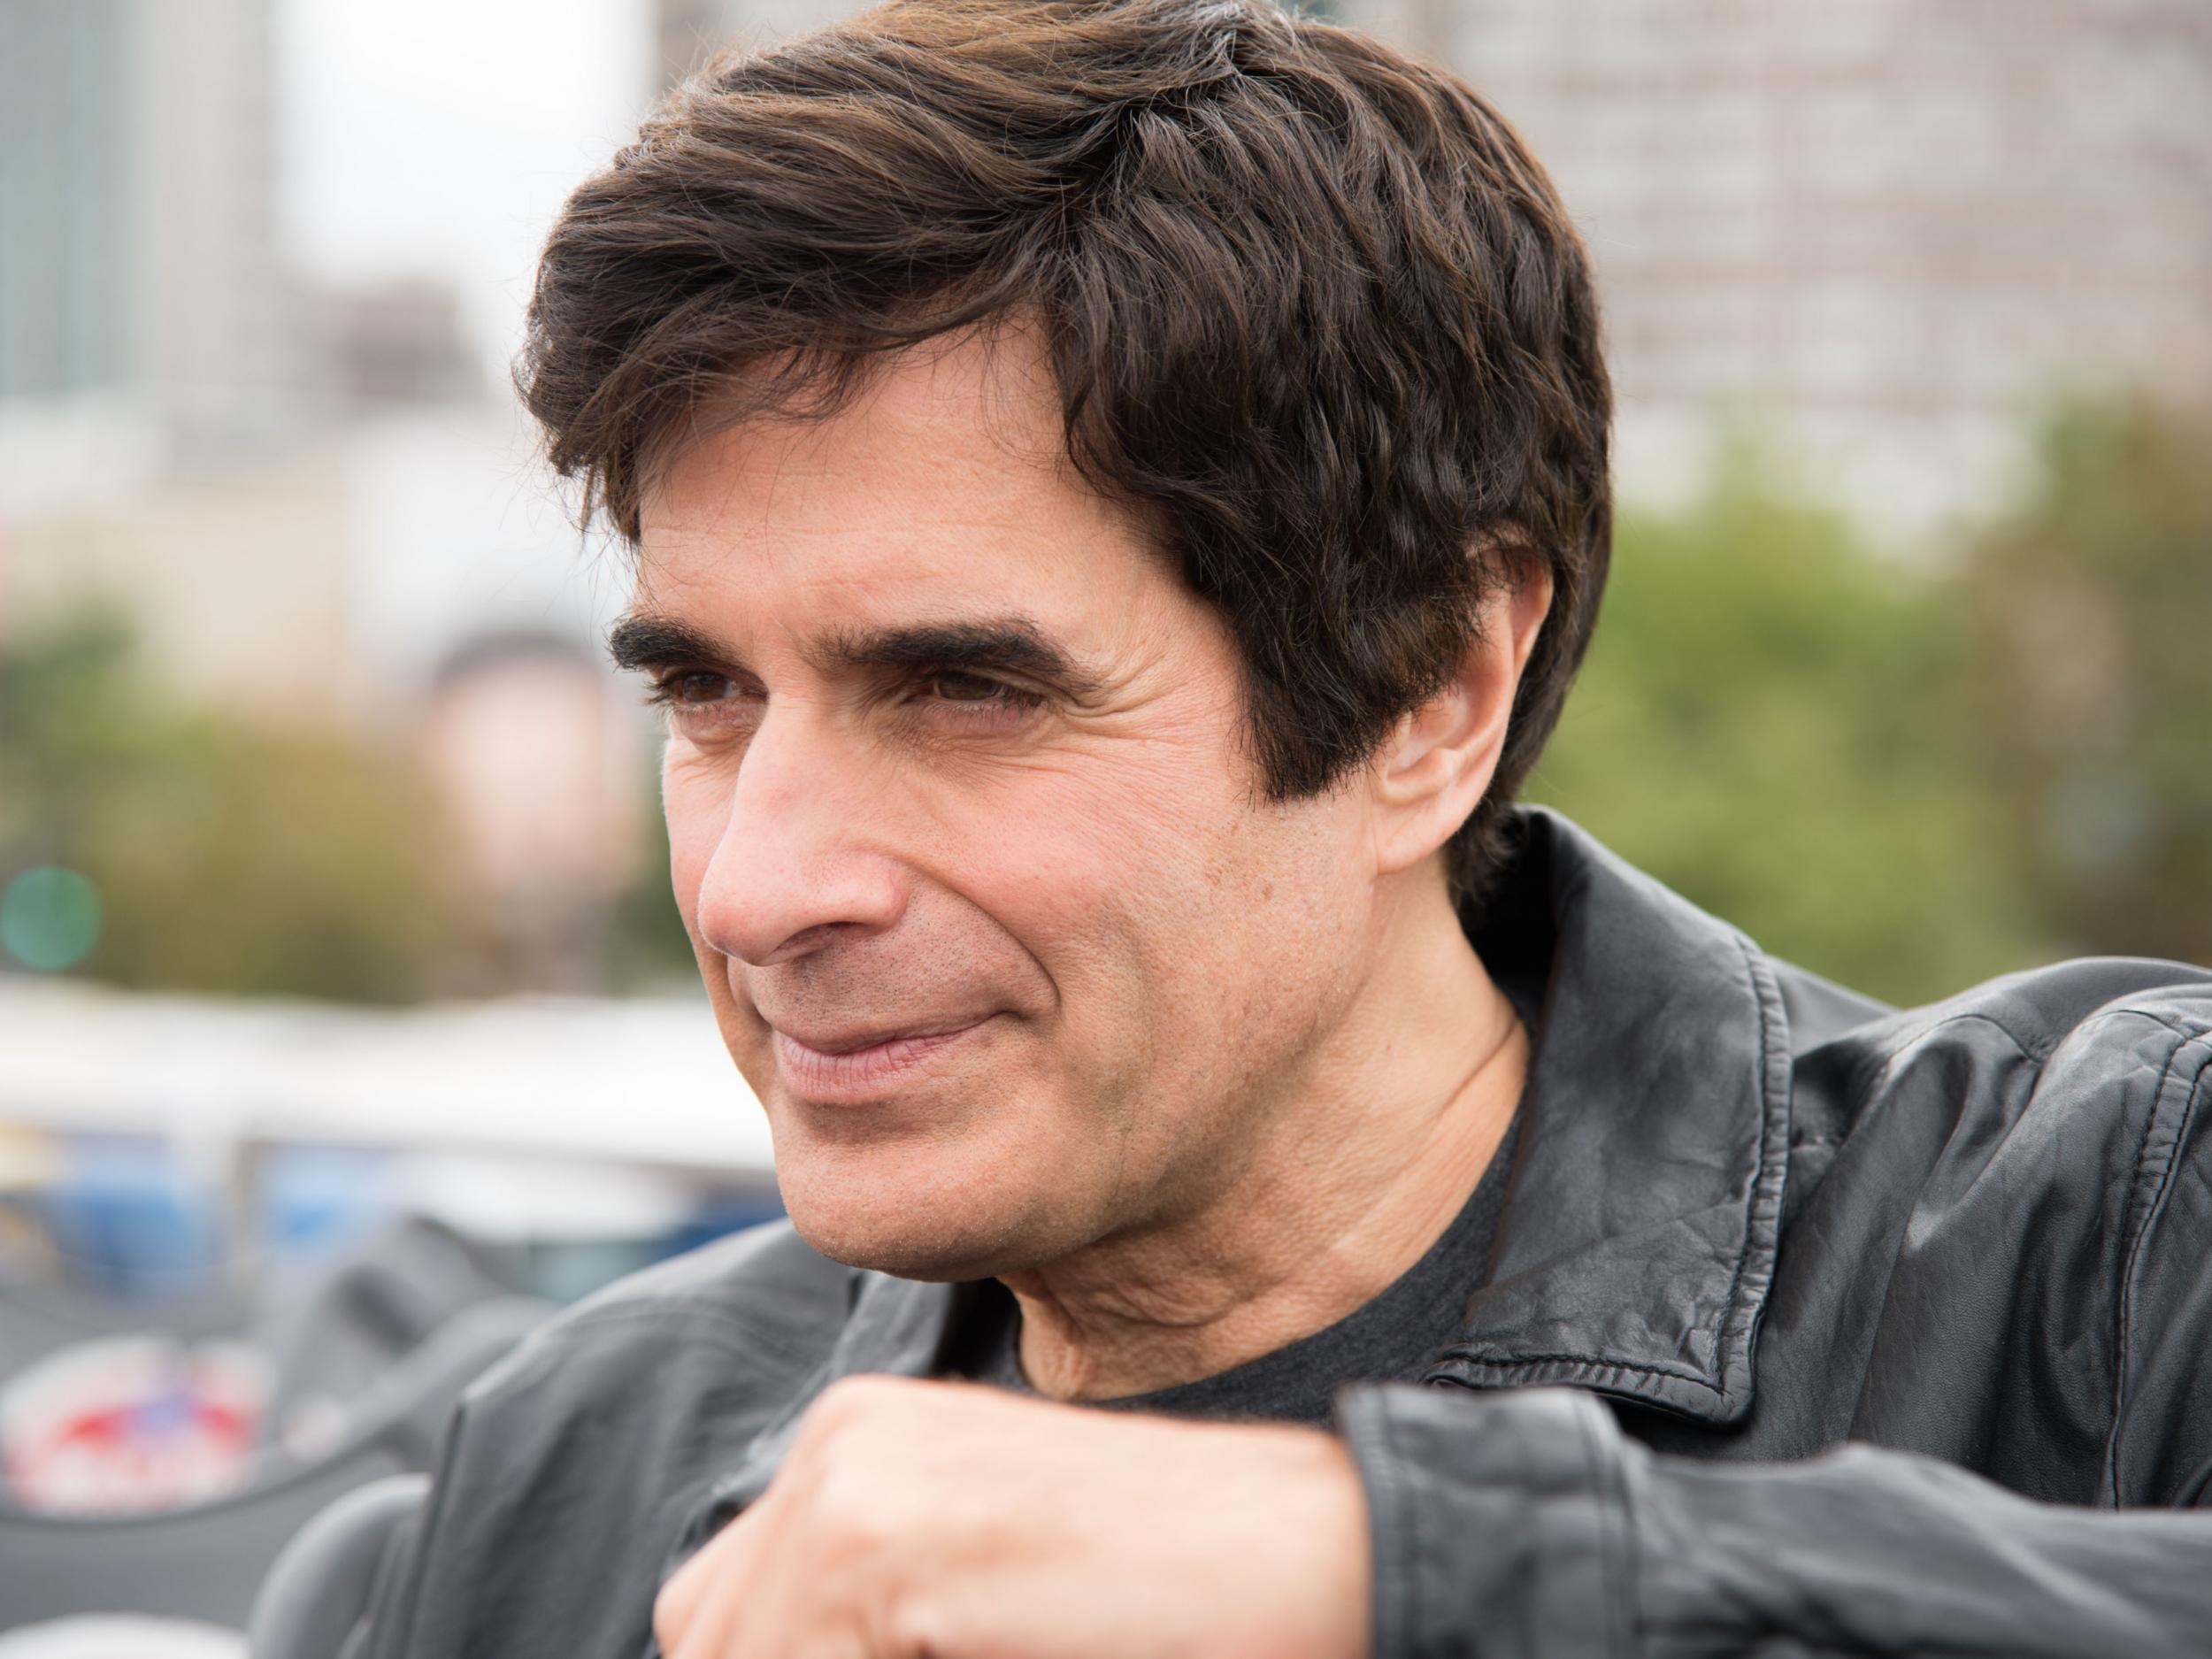 David Copperfield's lawyers lost pretrial bids to close proceedings to the public to avoid giving away performance secrets